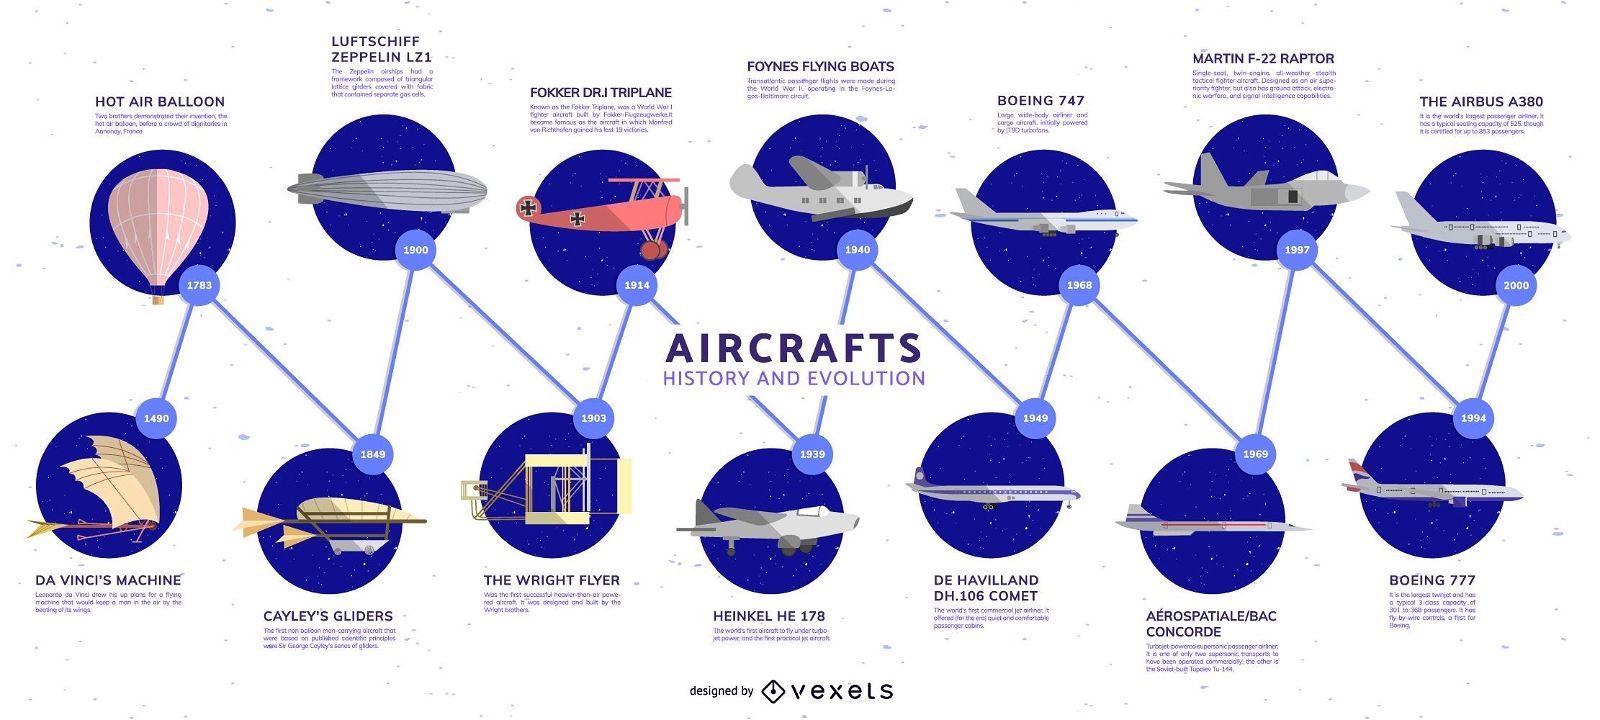 Evolution of Aircraft Timeline Infographic